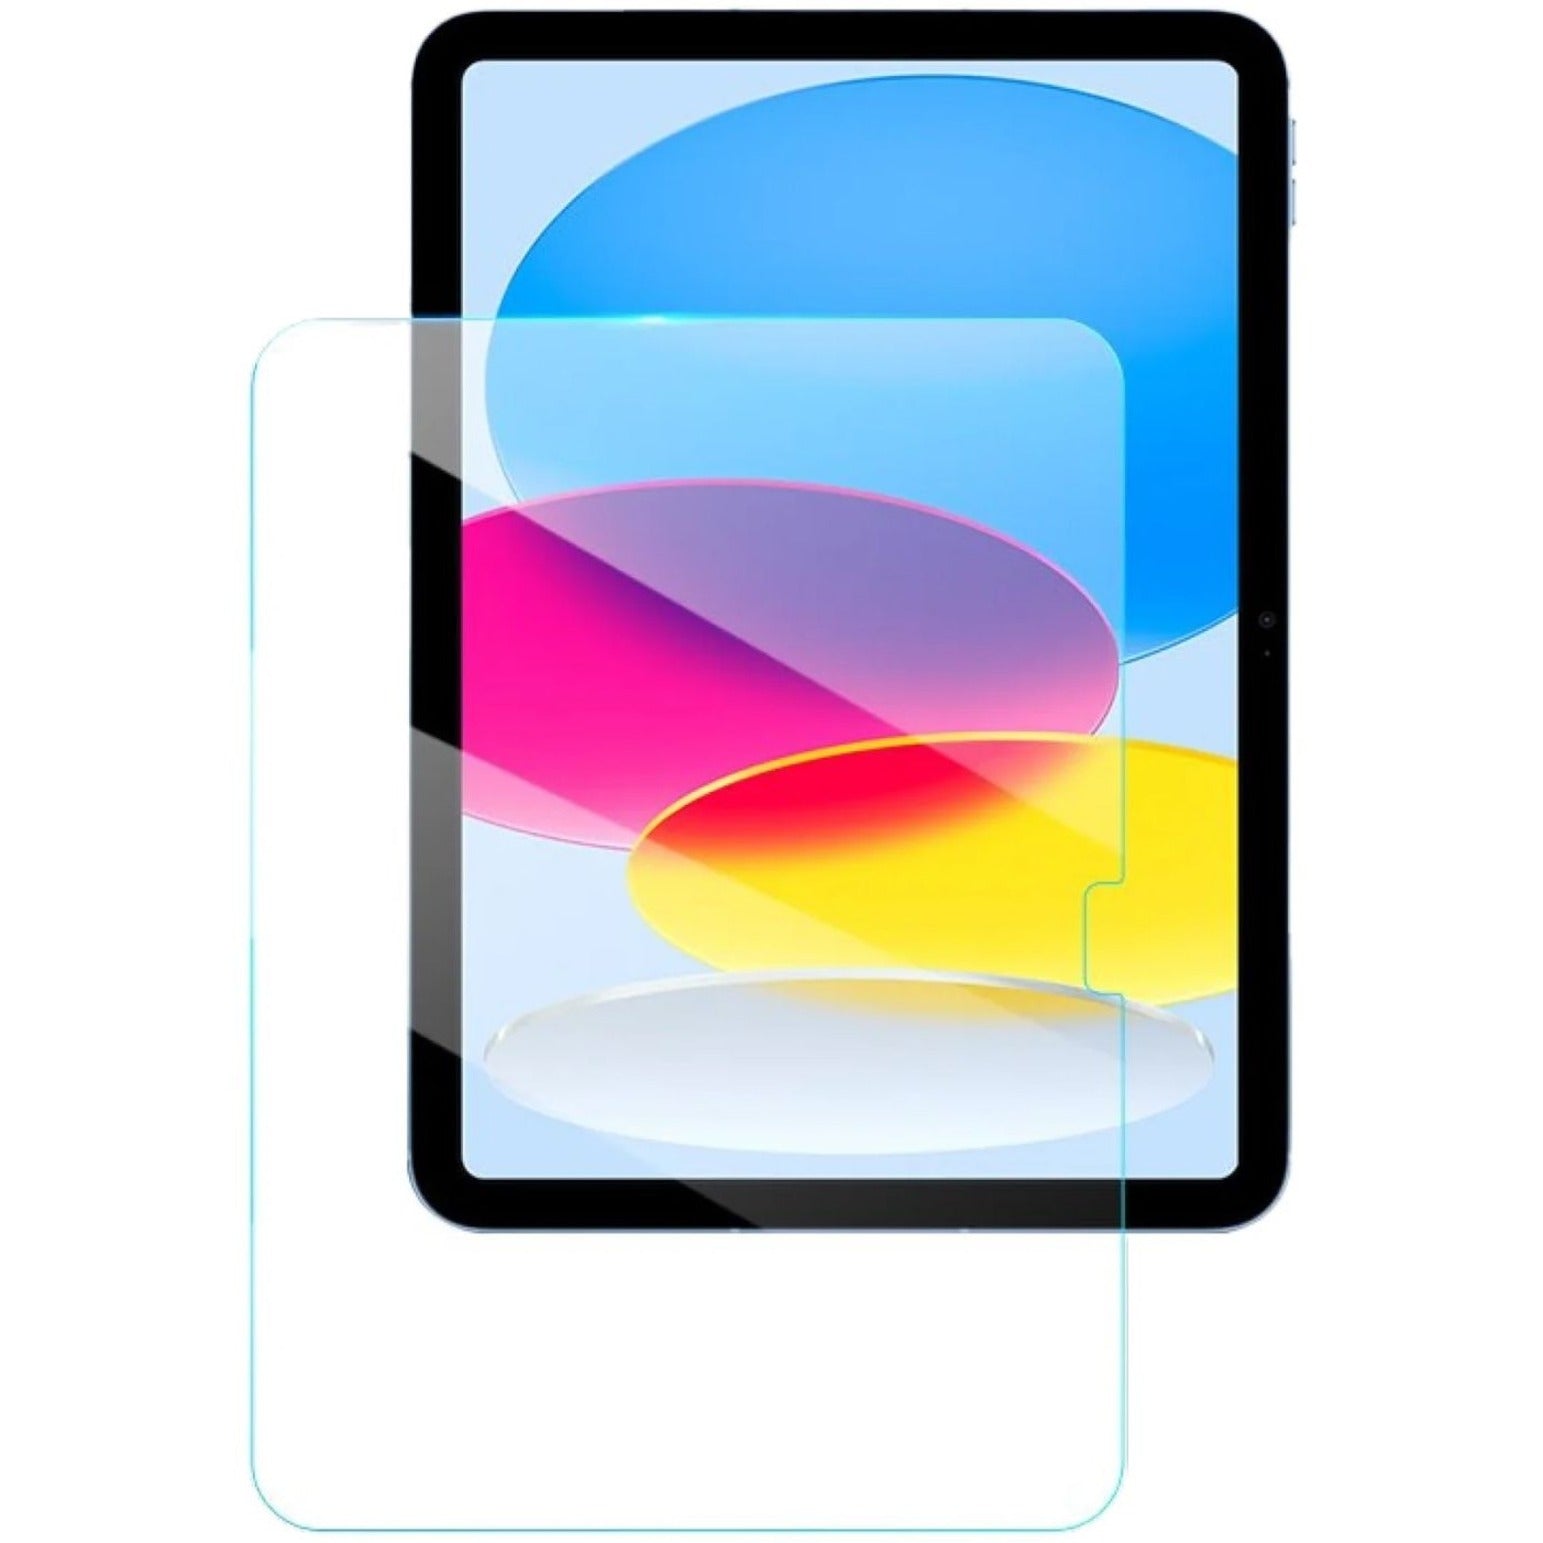 CODi A09070 Tempered Glass Screen Protector for iPad 10.9 (10th Generation), Easy to Apply, Oleophobic Coating, Touch Sensitive